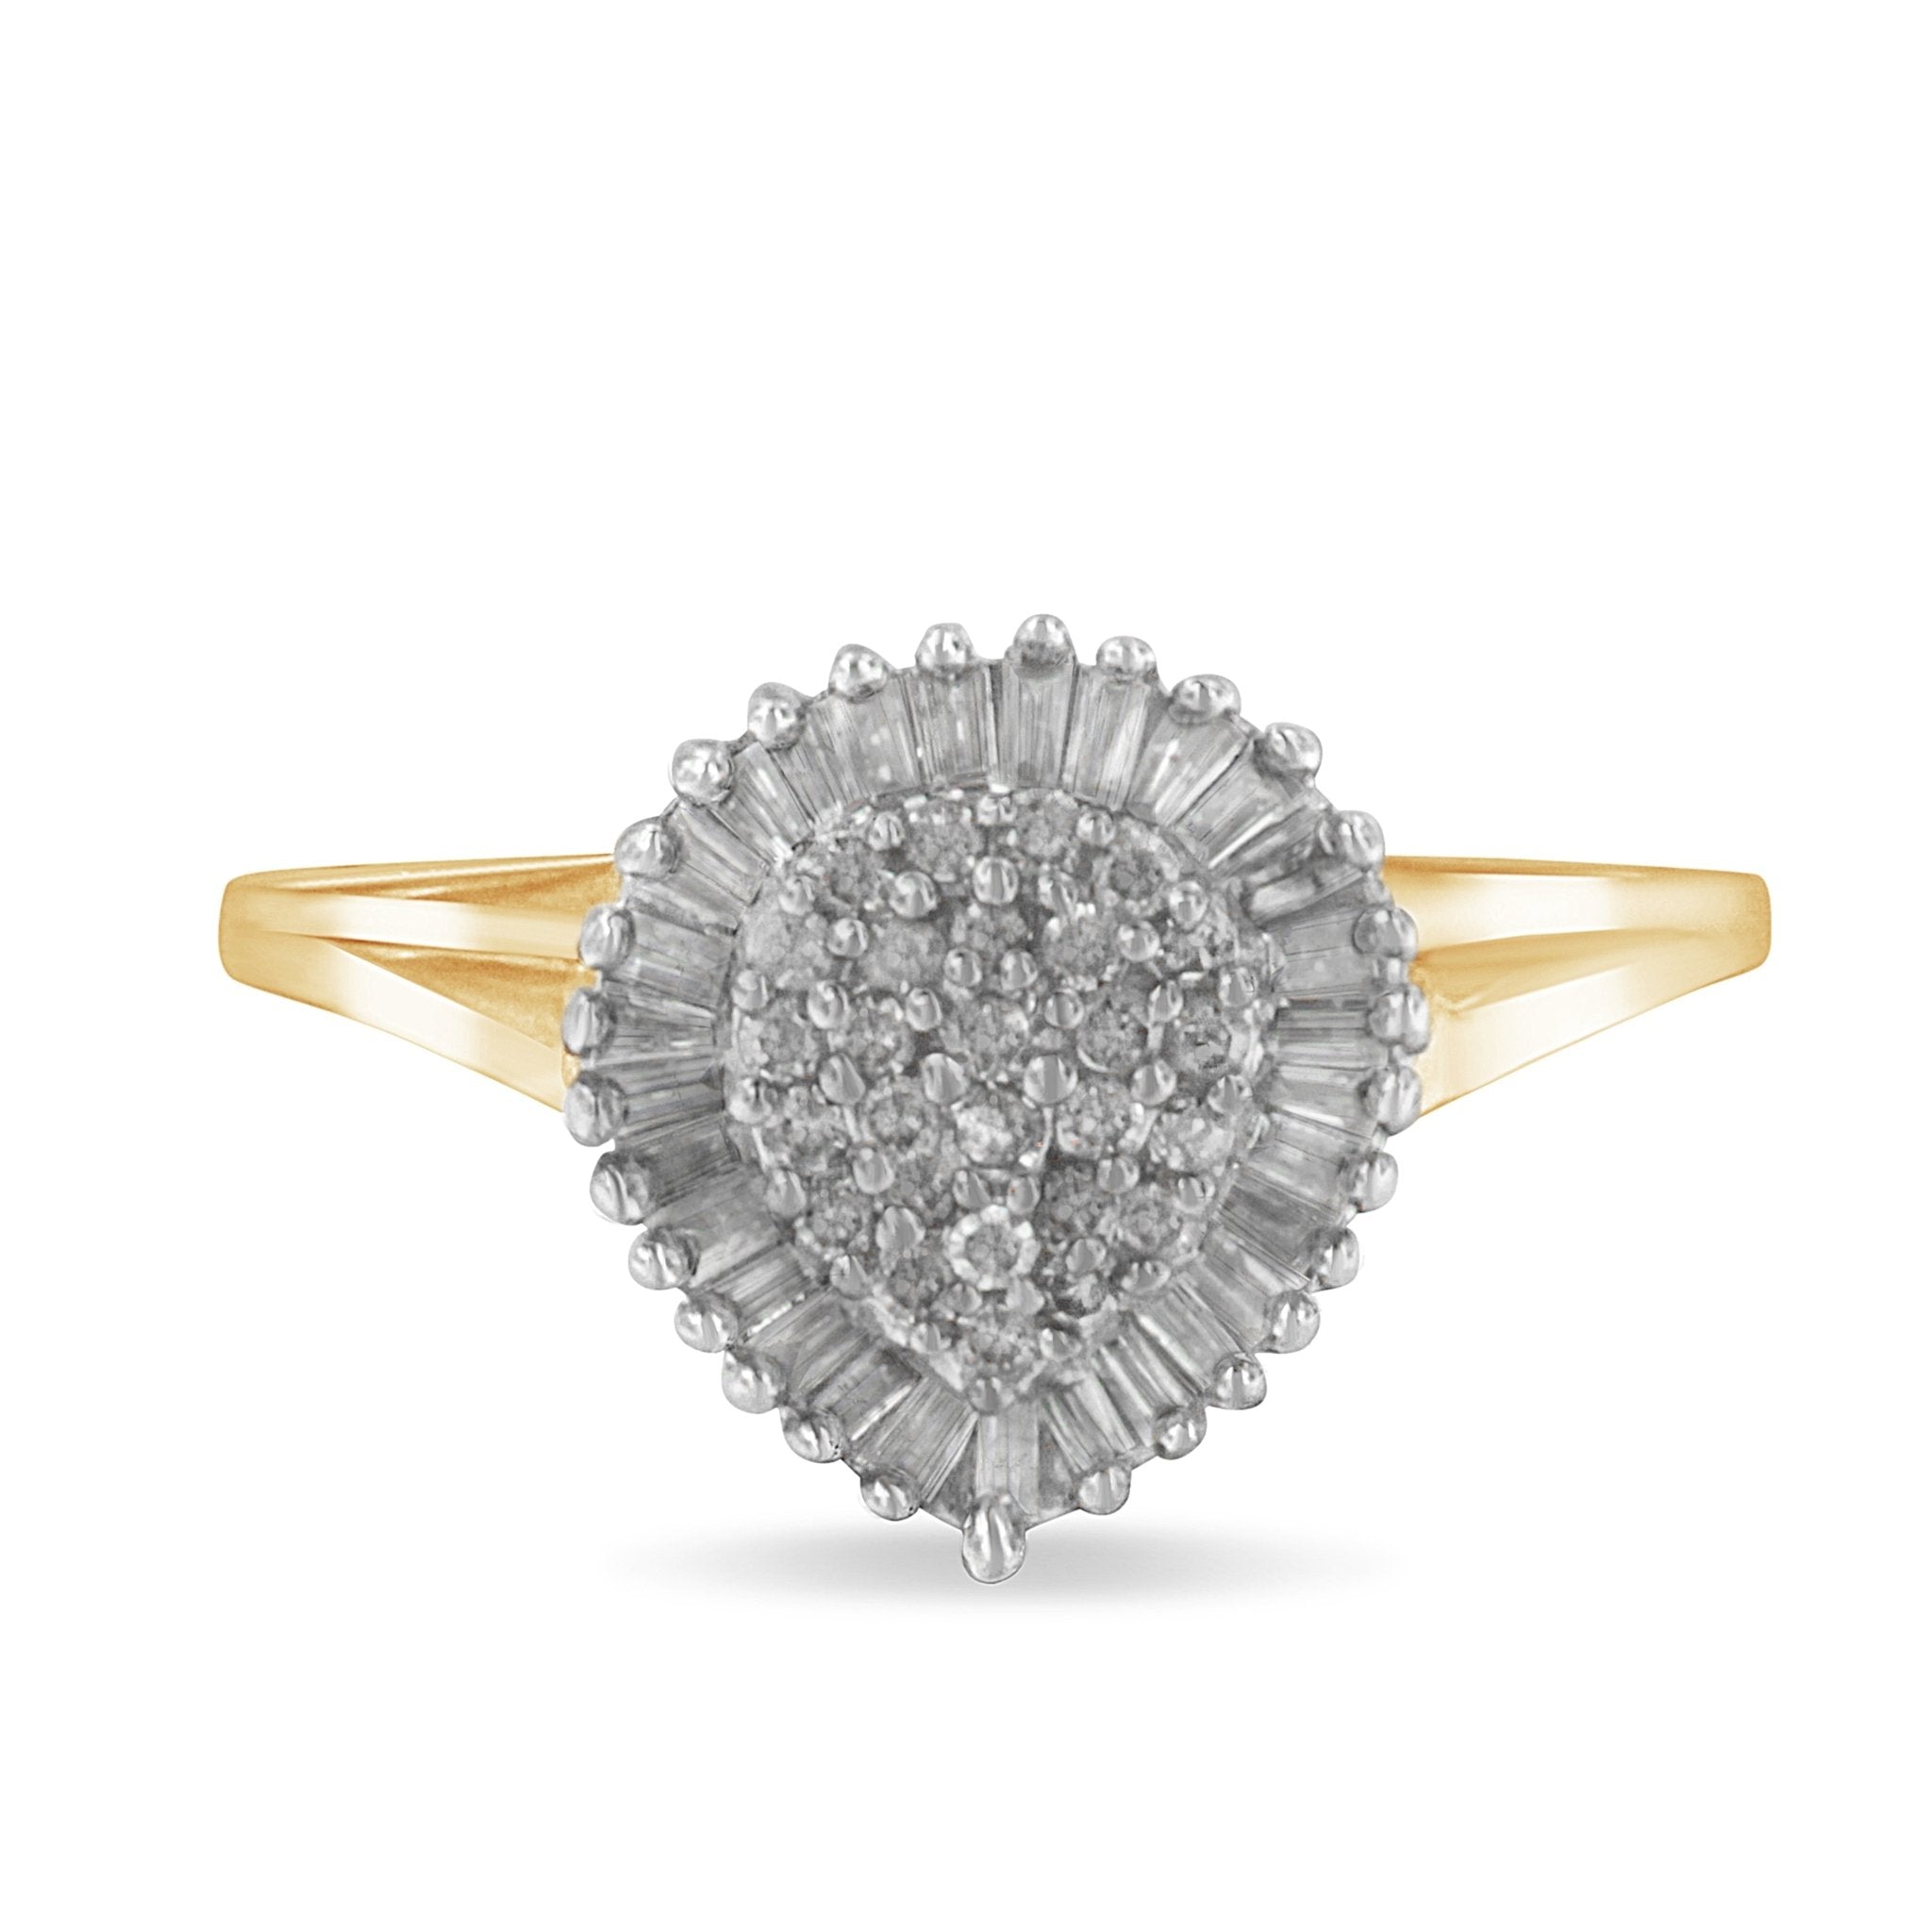 10K-Yellow-Gold-1/2-Cttw-Round-&-Baguette-Cut-Diamond-Pear-Shaped-Domed-Pavé-Cluster-With-Halo-Cocktail-Ring-(J-K-Color,-I1-I2-Clarity)-Size-7-1/4-Rings